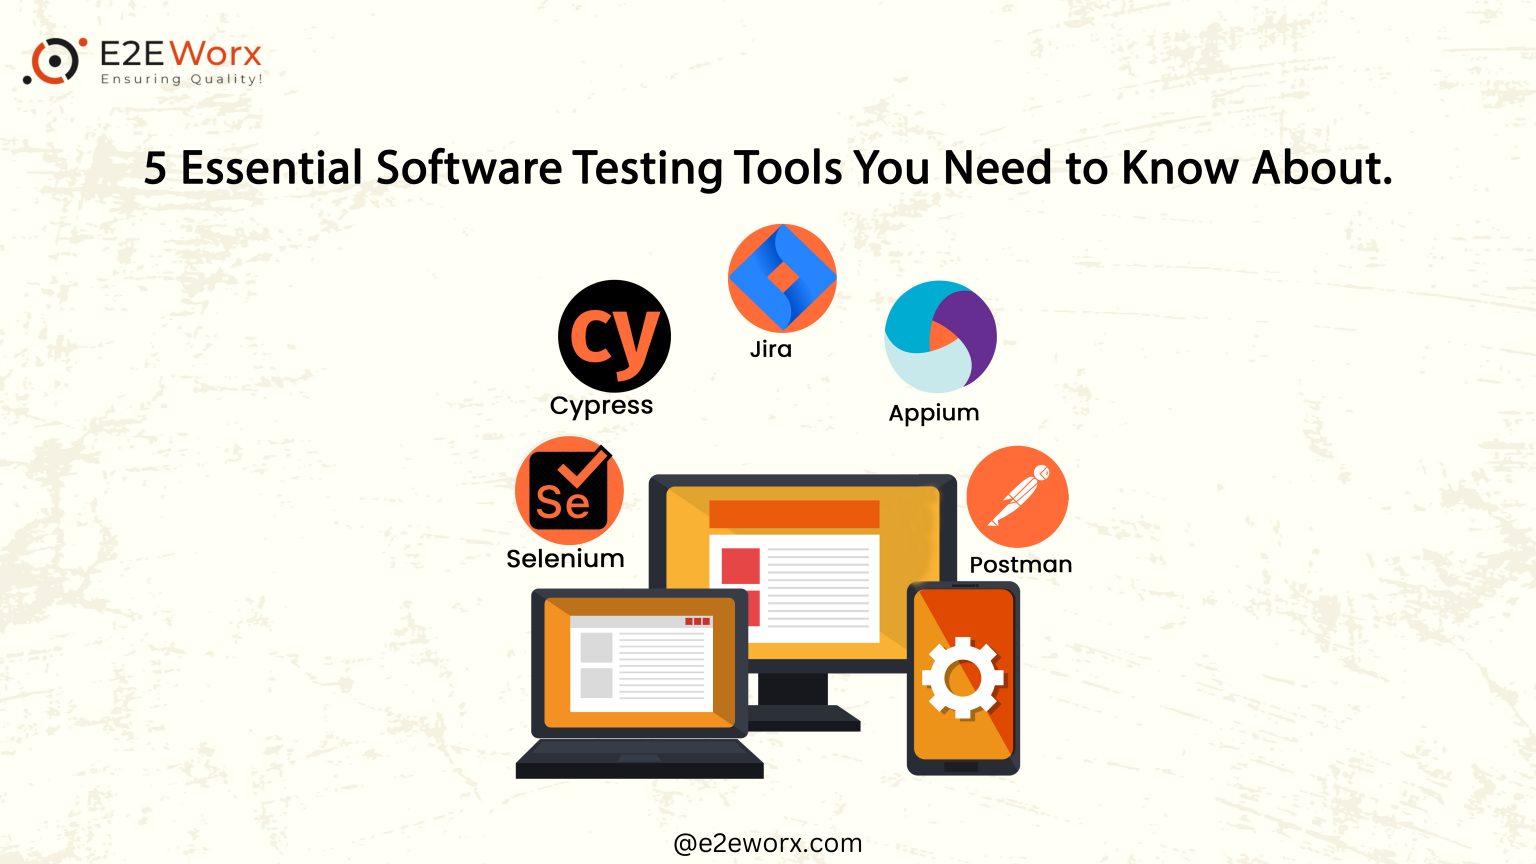 5 Essential Software Testing Tools You Need To Know About - E2EWorx